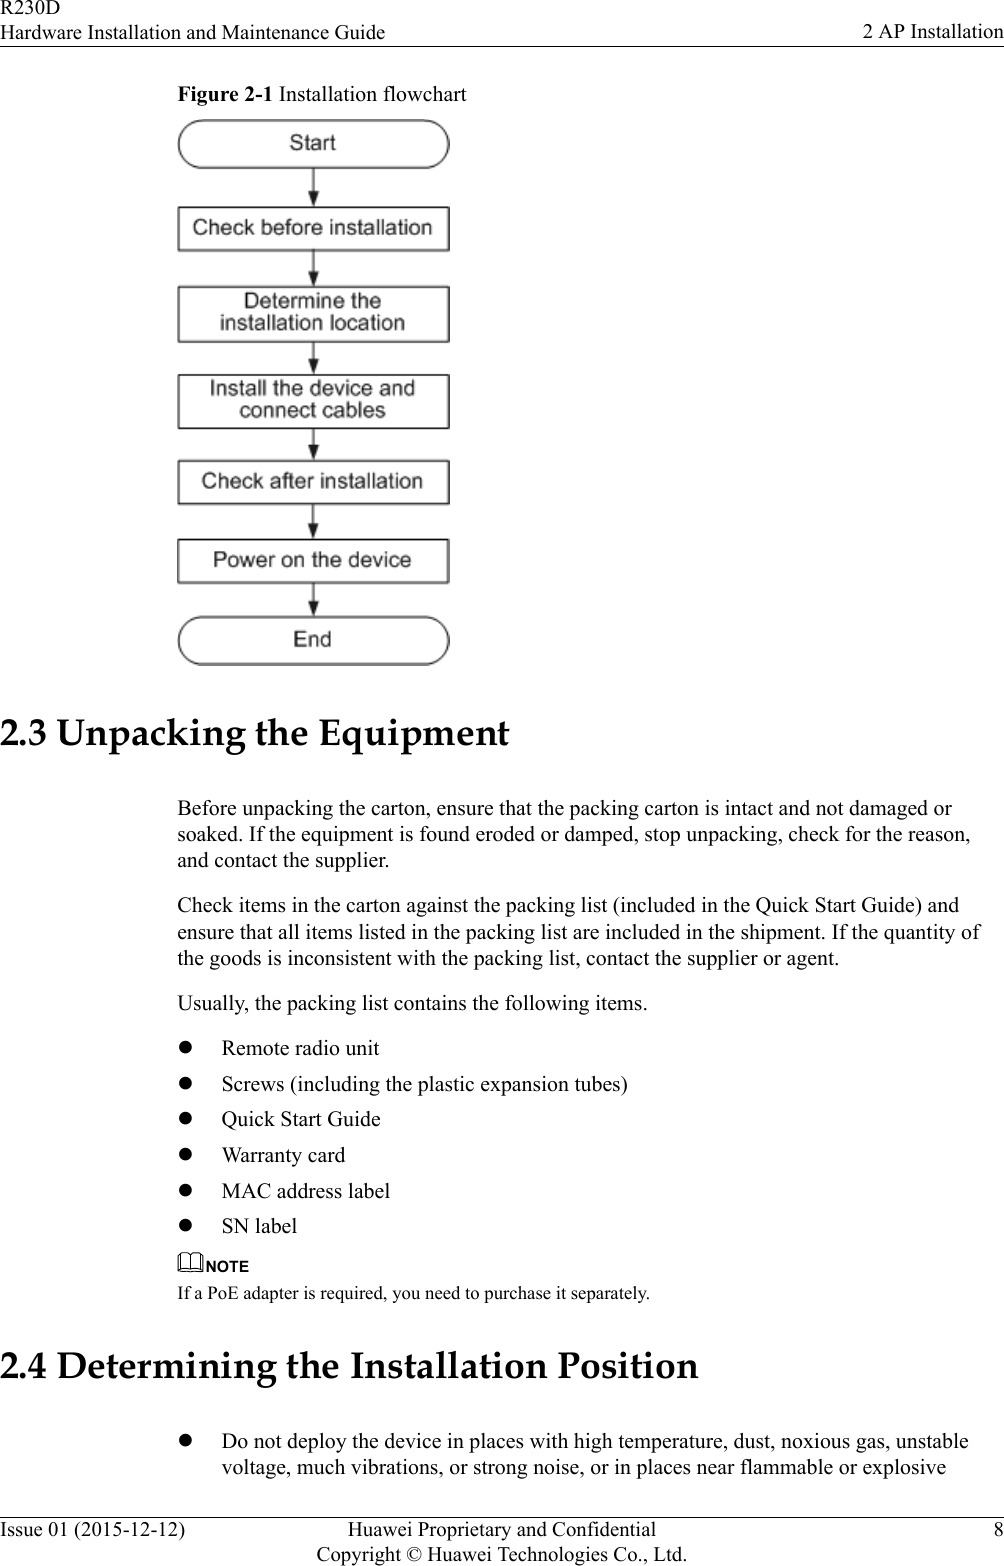 Figure 2-1 Installation flowchart2.3 Unpacking the EquipmentBefore unpacking the carton, ensure that the packing carton is intact and not damaged orsoaked. If the equipment is found eroded or damped, stop unpacking, check for the reason,and contact the supplier.Check items in the carton against the packing list (included in the Quick Start Guide) andensure that all items listed in the packing list are included in the shipment. If the quantity ofthe goods is inconsistent with the packing list, contact the supplier or agent.Usually, the packing list contains the following items.lRemote radio unitlScrews (including the plastic expansion tubes)lQuick Start GuidelWarranty cardlMAC address labellSN labelNOTEIf a PoE adapter is required, you need to purchase it separately.2.4 Determining the Installation PositionlDo not deploy the device in places with high temperature, dust, noxious gas, unstablevoltage, much vibrations, or strong noise, or in places near flammable or explosiveR230DHardware Installation and Maintenance Guide 2 AP InstallationIssue 01 (2015-12-12) Huawei Proprietary and ConfidentialCopyright © Huawei Technologies Co., Ltd.8